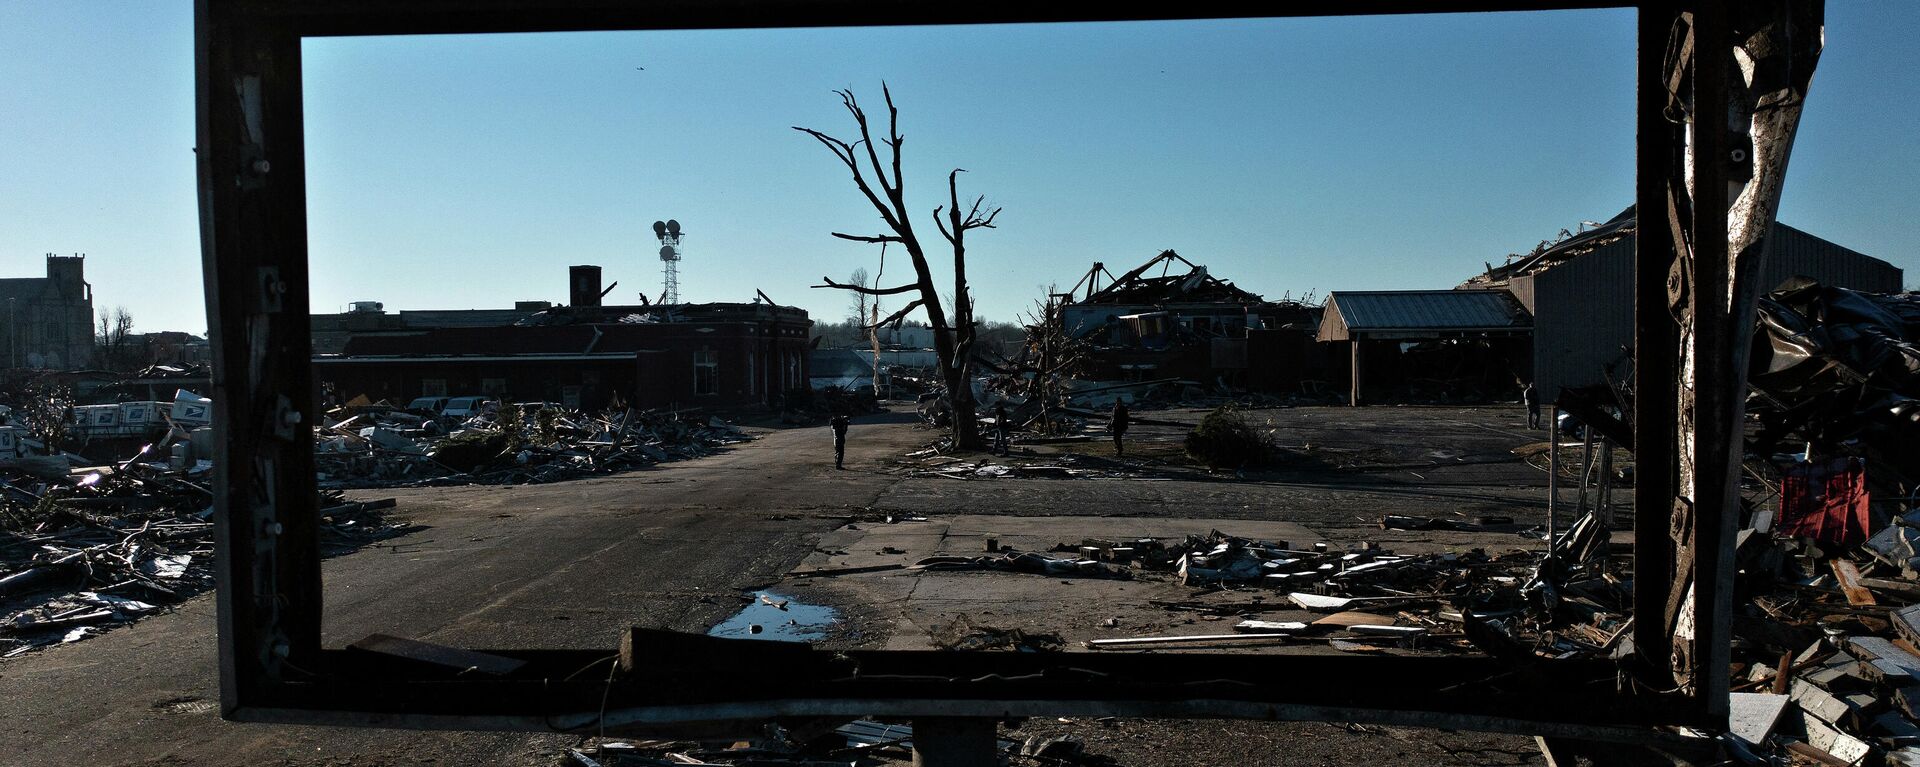 Tornado damage is seen after extreme weather hit the region December 12, 2021, in Mayfield, Kentucky. - Dozens of devastating tornadoes roared through five US states overnight, leaving more than 80 people dead on December 11, 2021 in what President Joe Biden said was one of the largest storm outbreaks in history. - Sputnik International, 1920, 13.12.2021